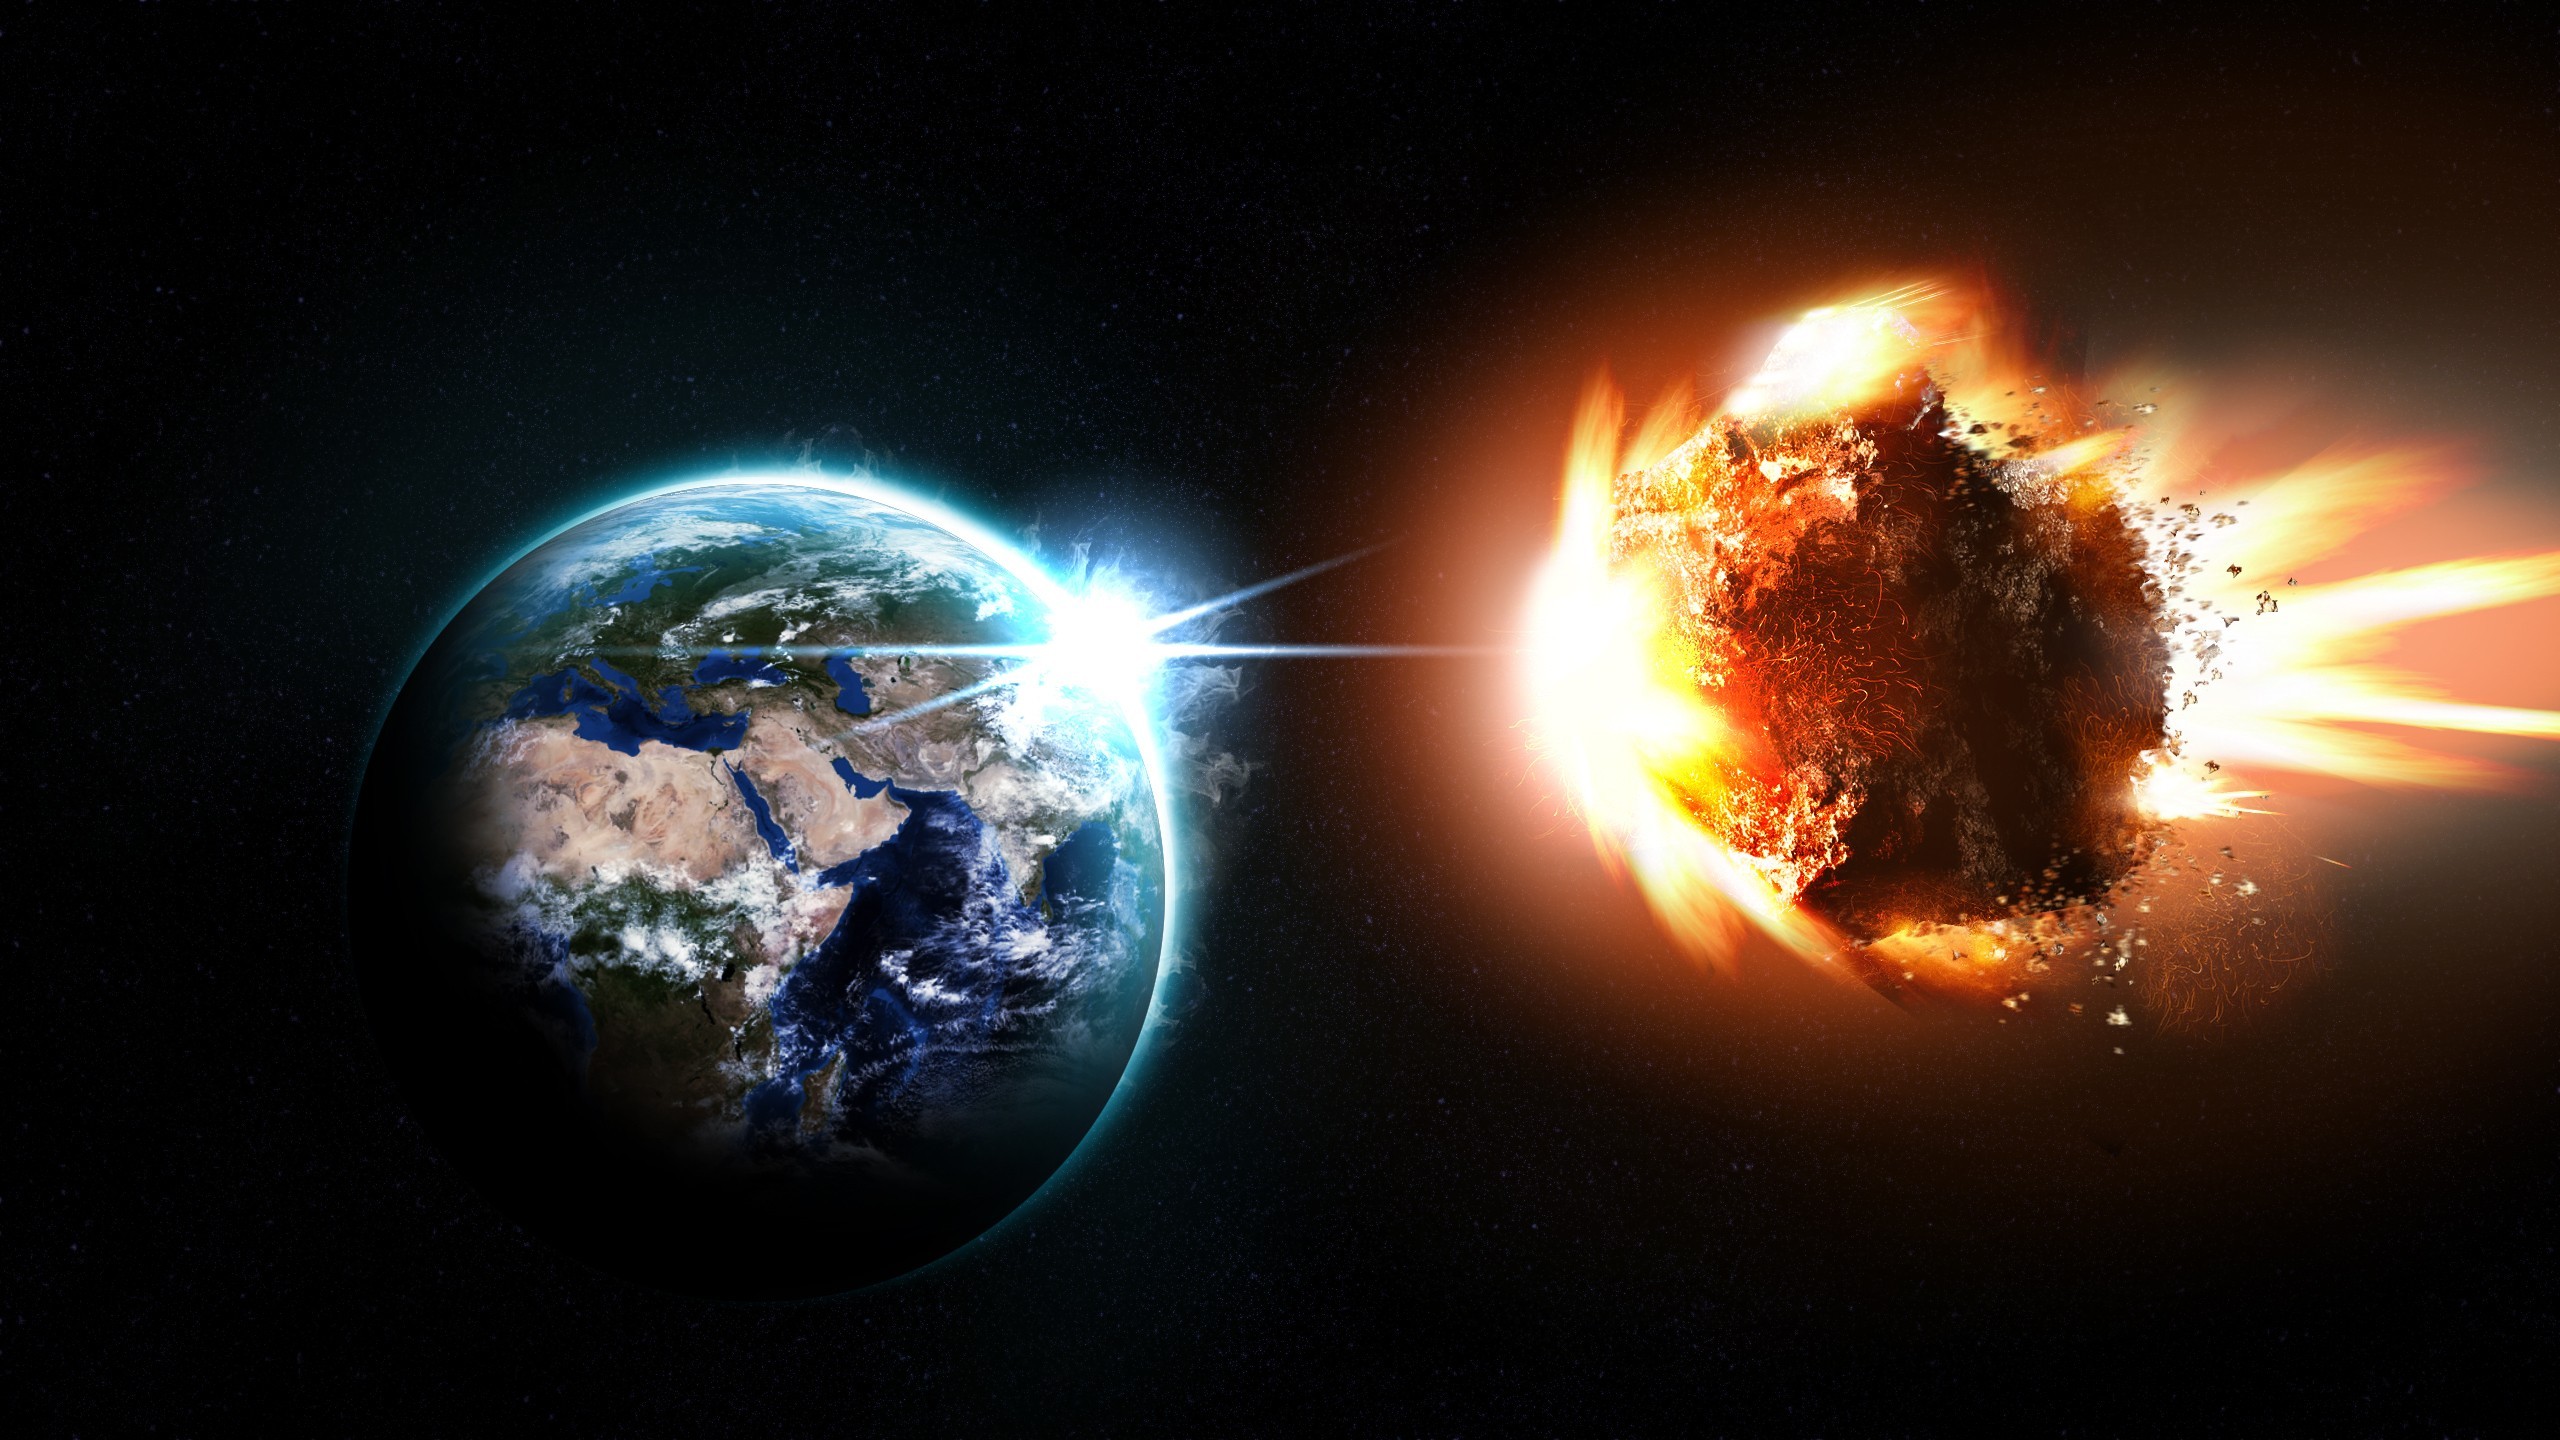 General 2560x1440 Earth space asteroid space art apocalyptic digital art planet